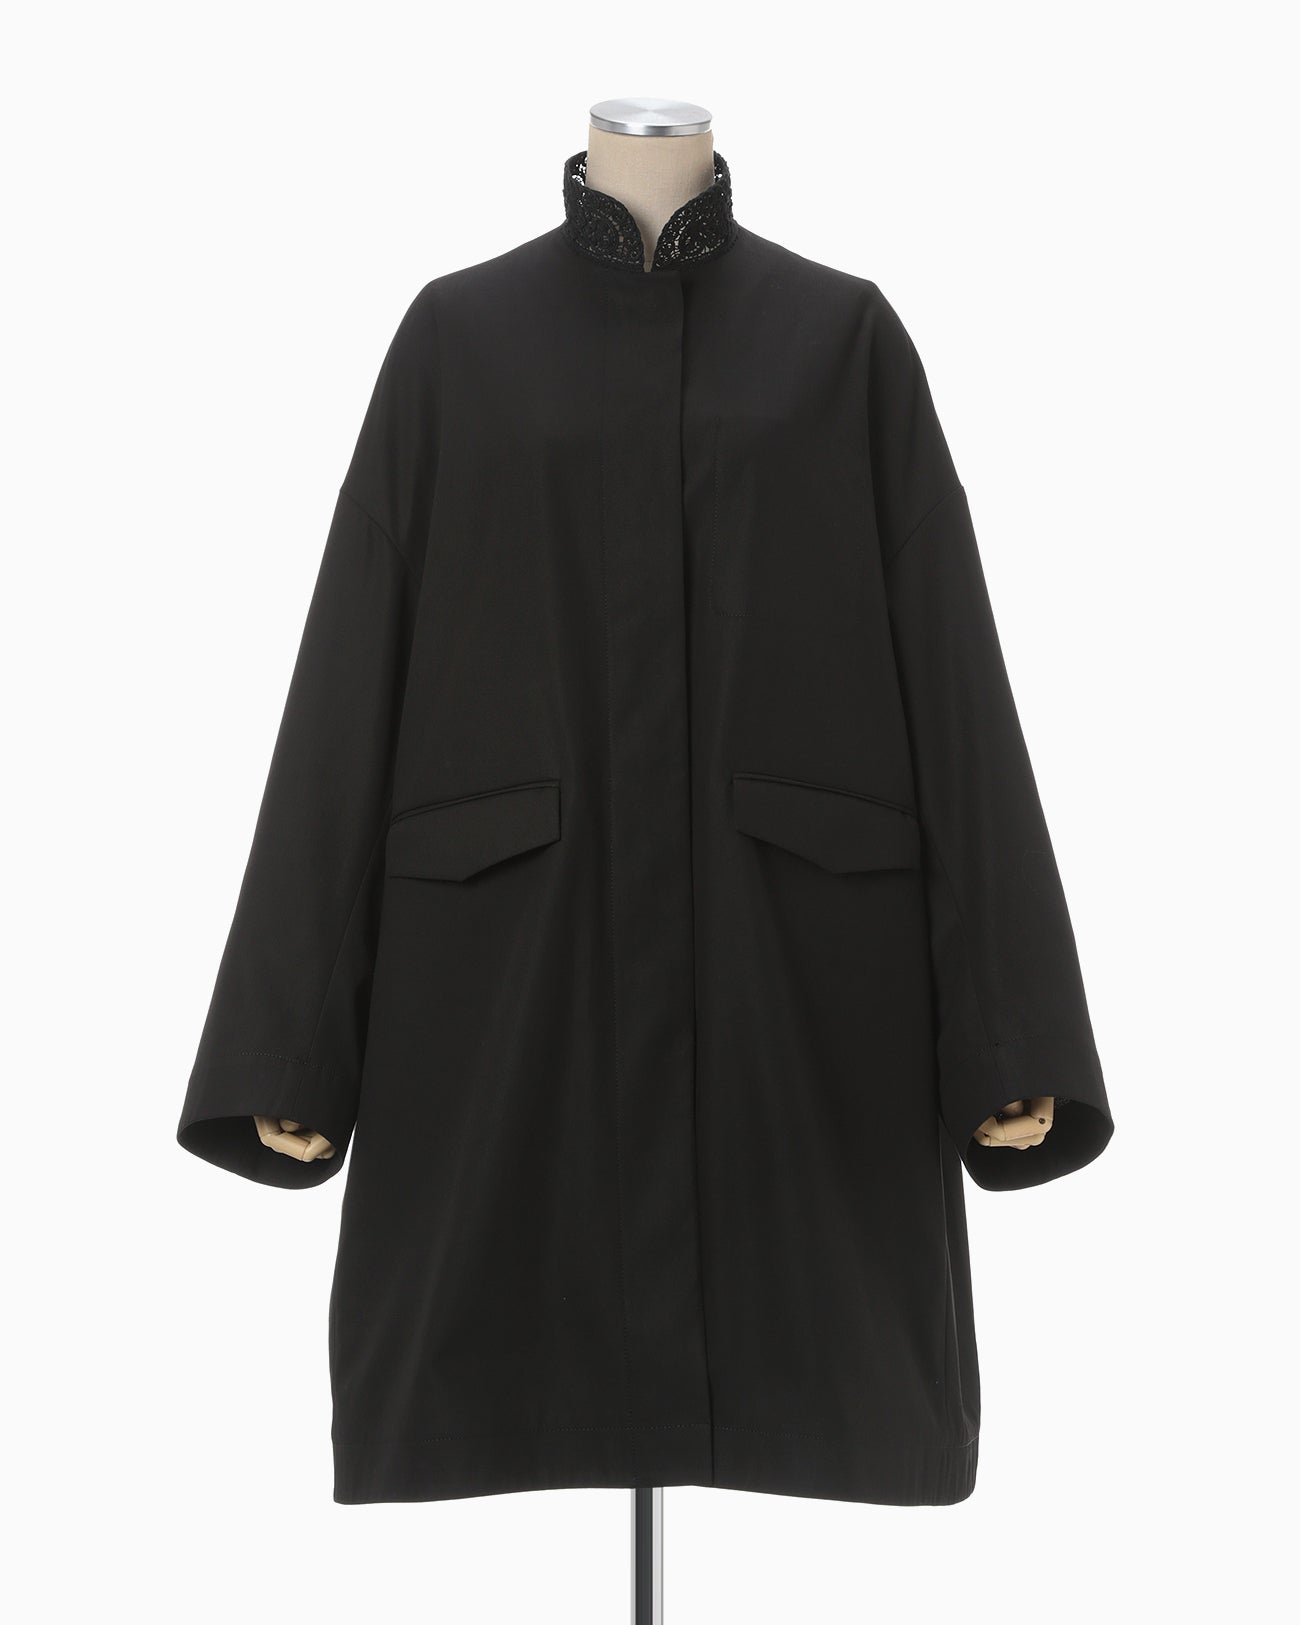 Cording Embroidery Detail Cotton Over Size Coat - black